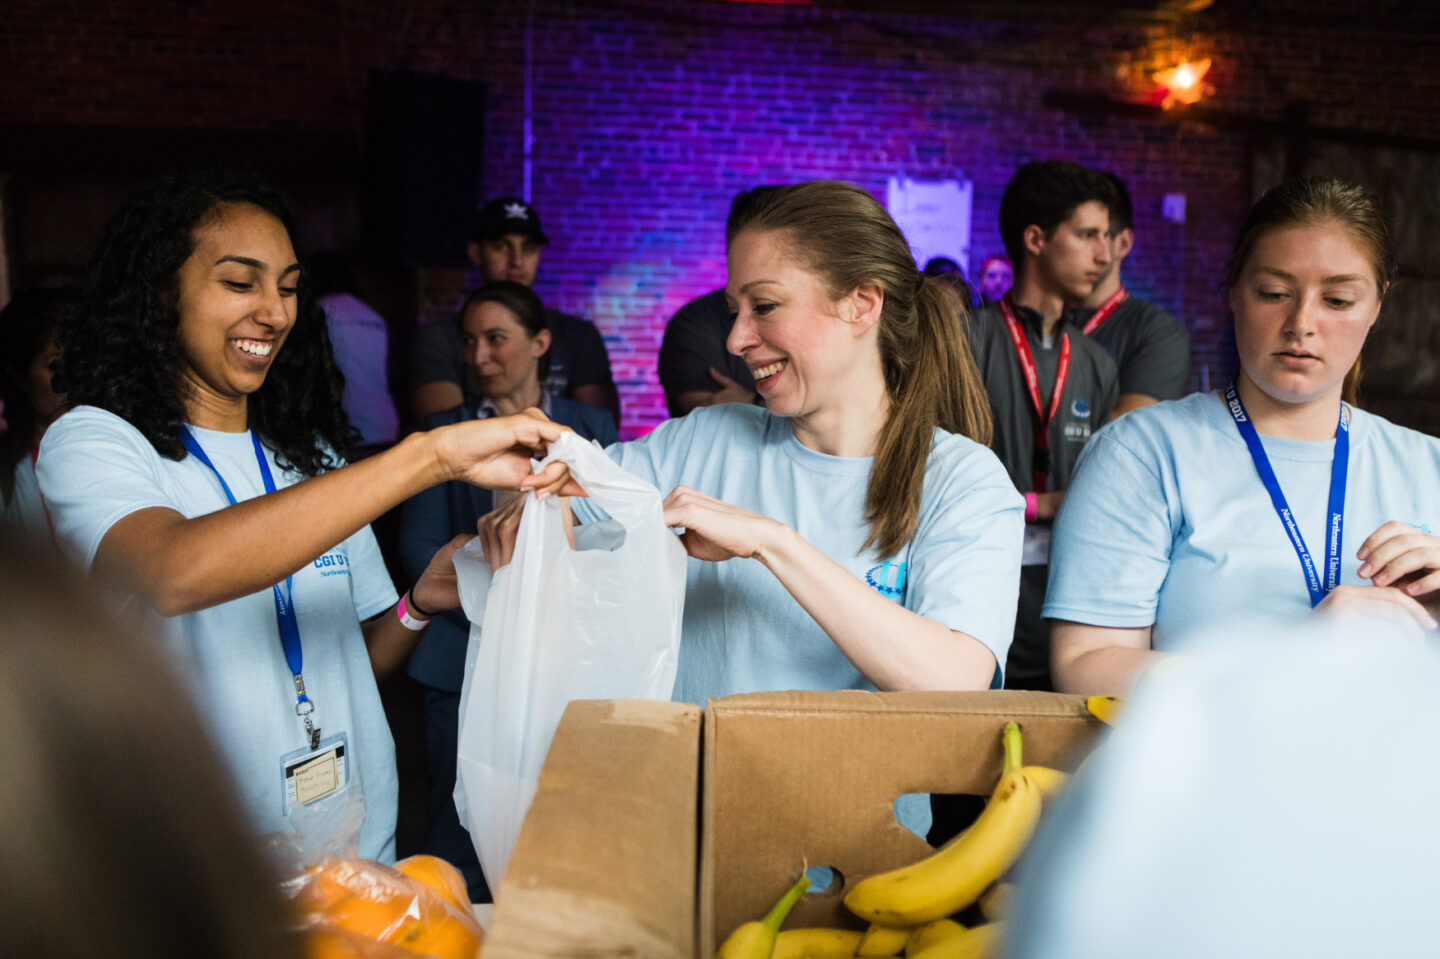 Chelsea Clinton and volunteers put produce into bags at a volunteer event